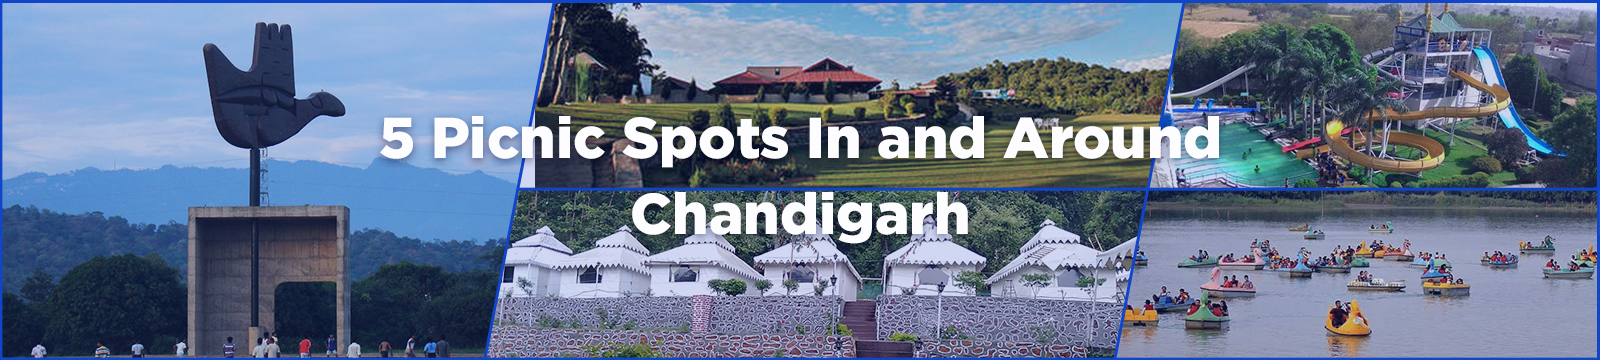 5 Picnic Spots In and Around Chandigarh